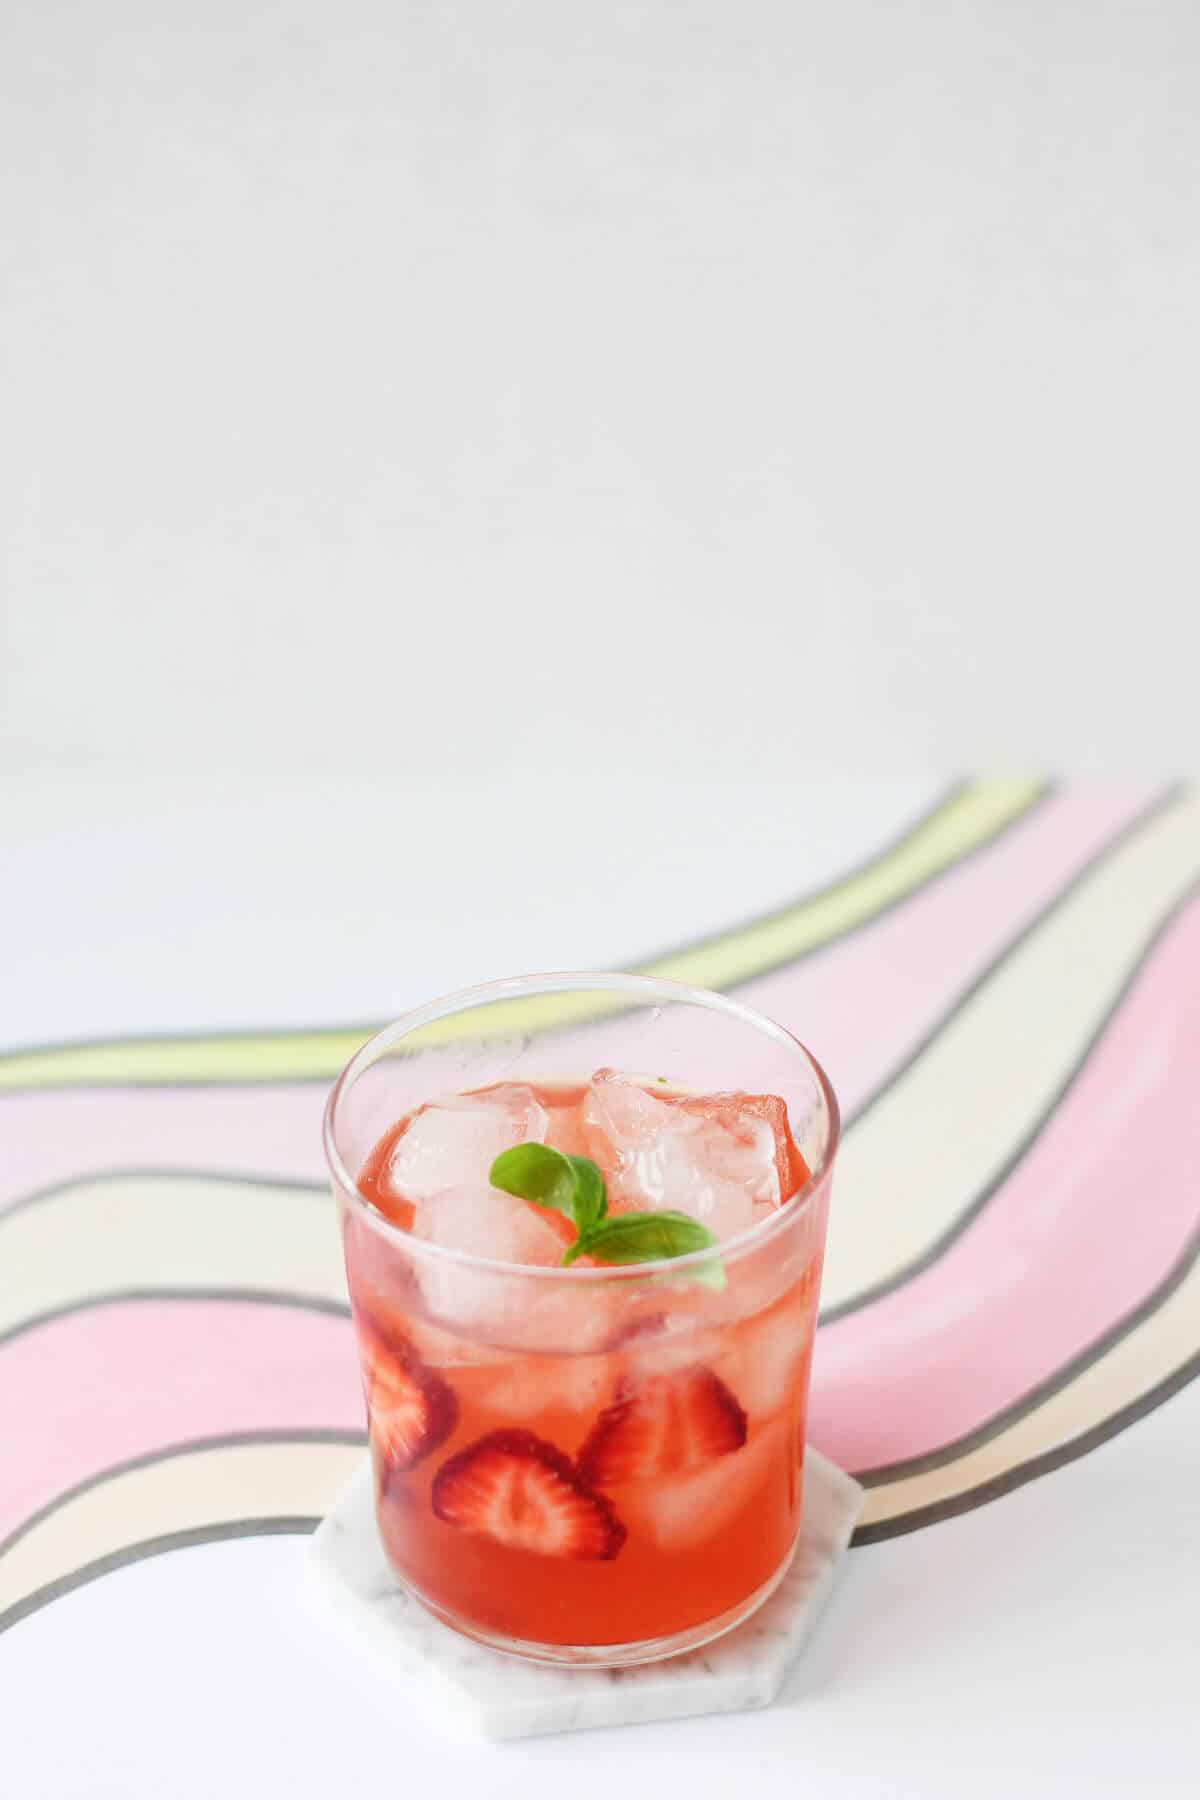 Clear glass filled with pink cocktail, sliced strawberries, ice and a sprig of basil.